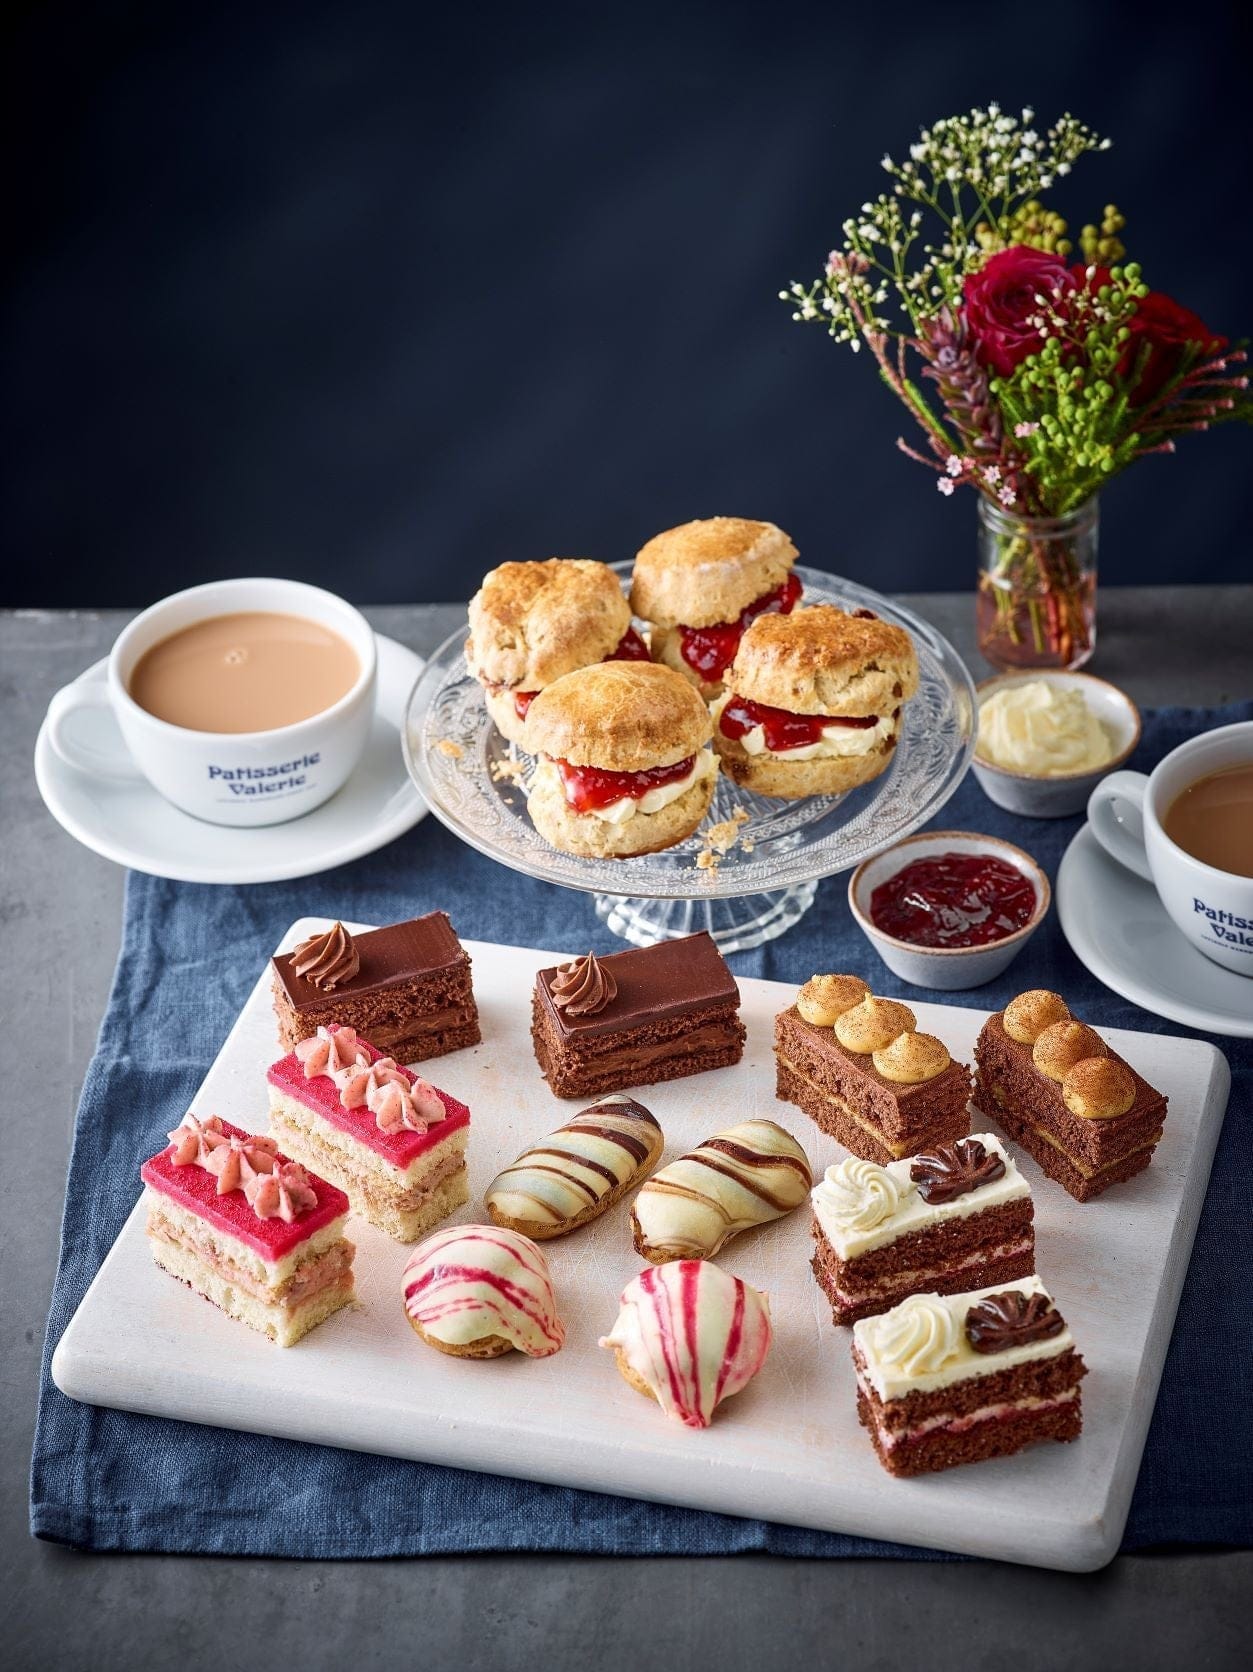 Madame Valerie's Afternoon Tea | Next Day Delivery | Patisserie Valerie